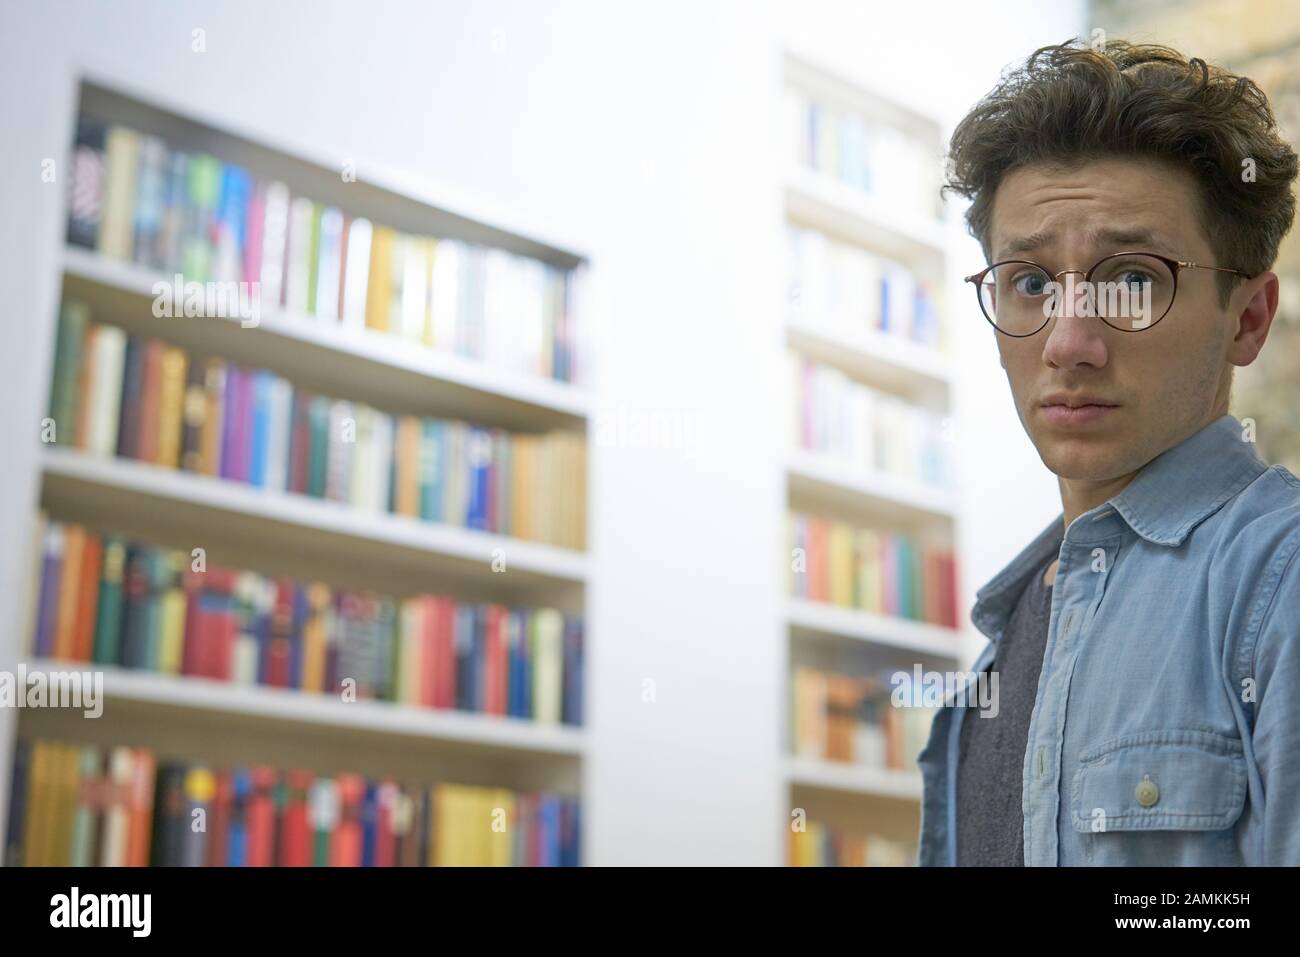 Young student with glasses, looking helpless and overcharged into the camera in library at university. Stock Photo